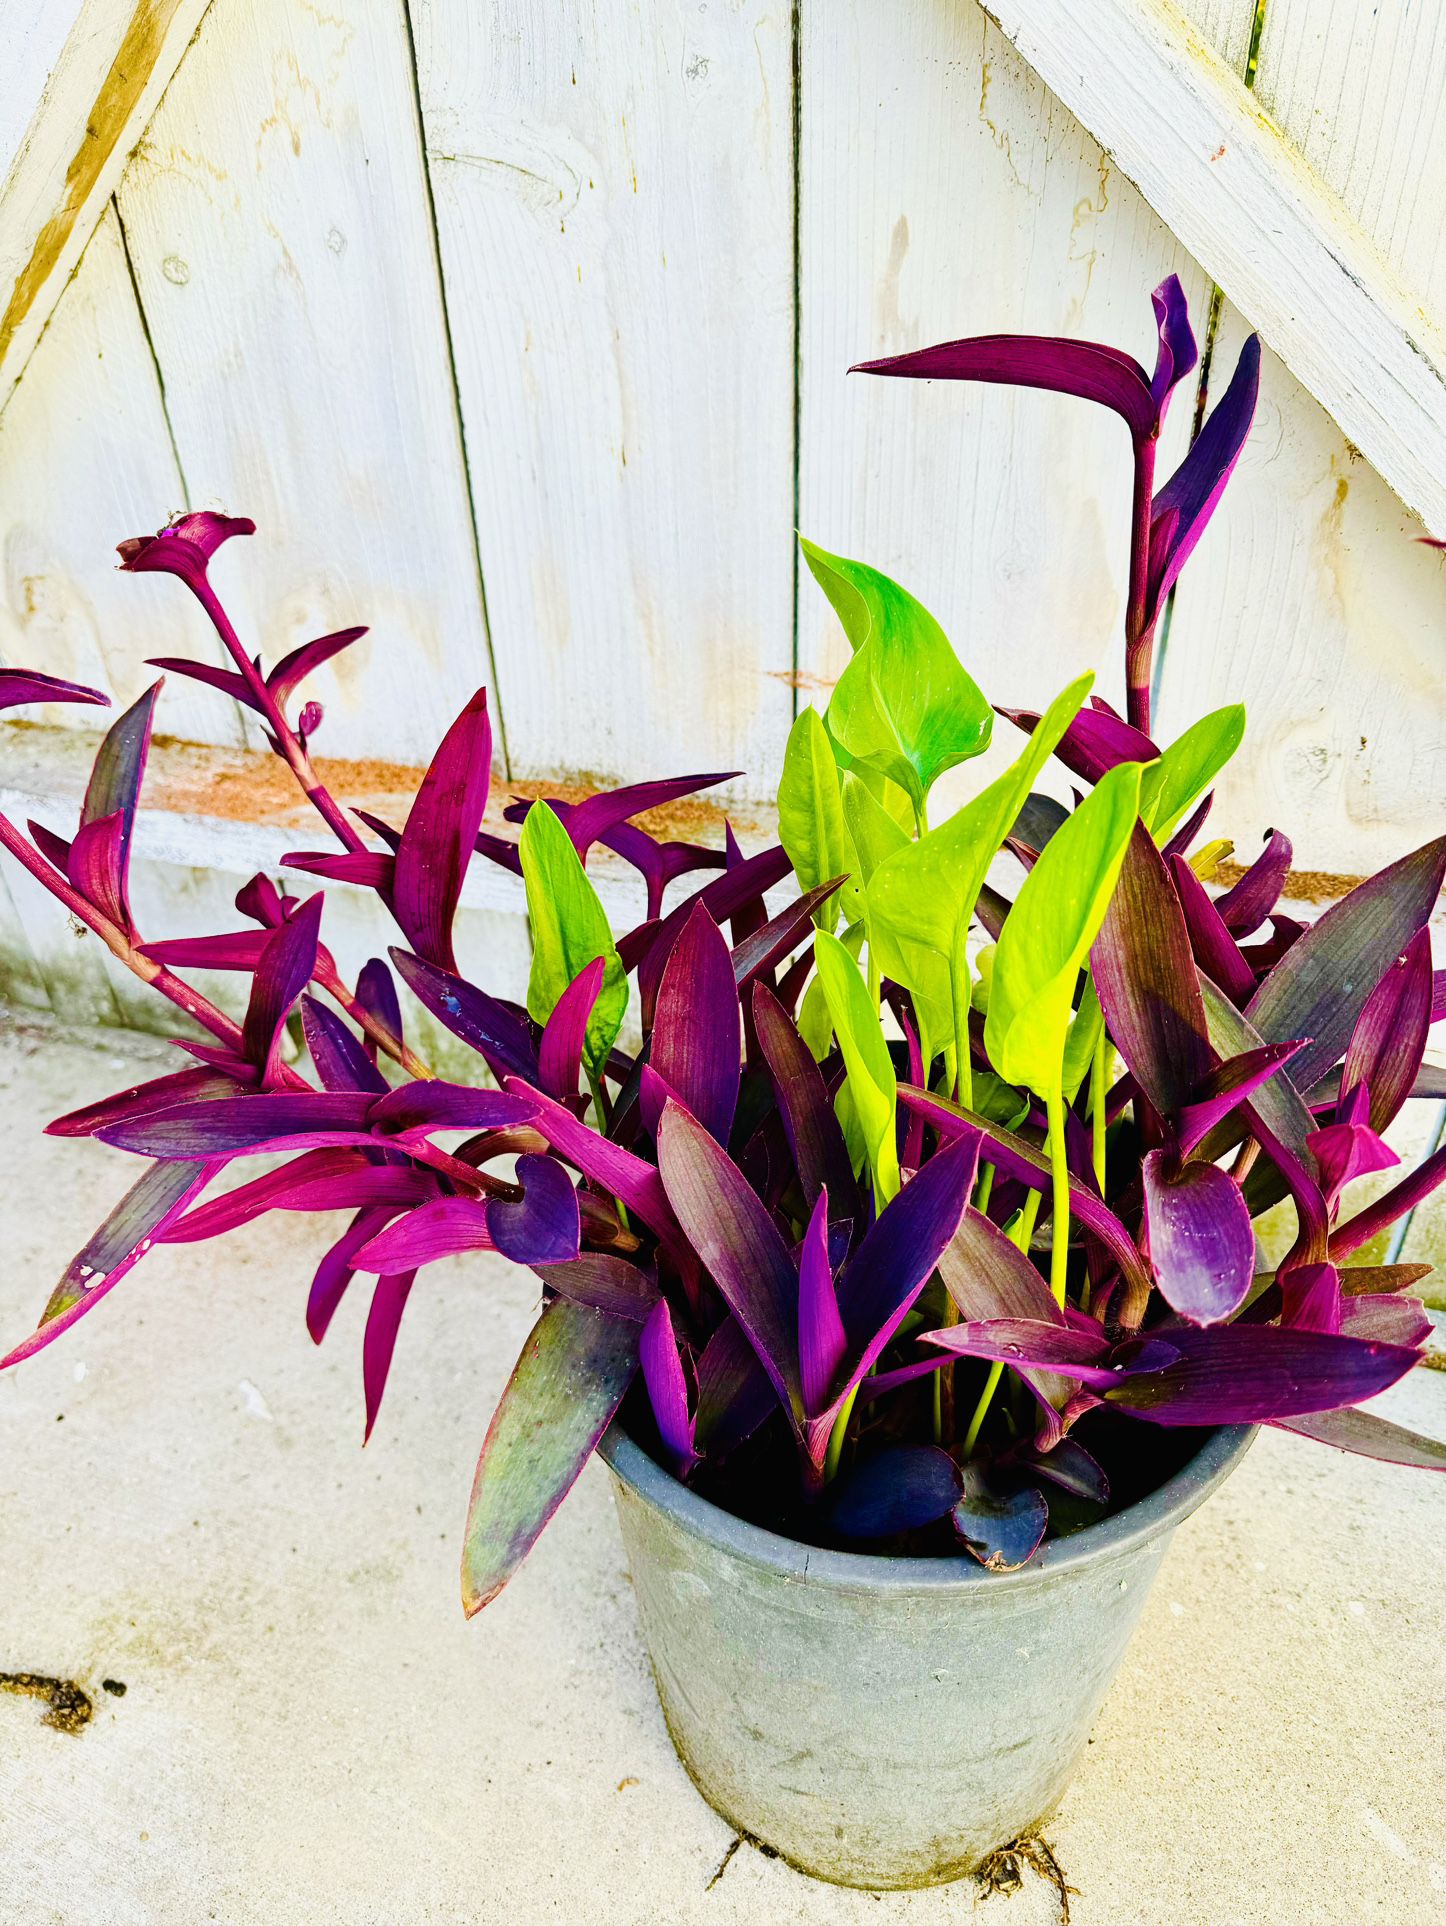 Mix Purple Hearts And Calla Lily Plants In 5 Gallon Pot- Easy To Grow